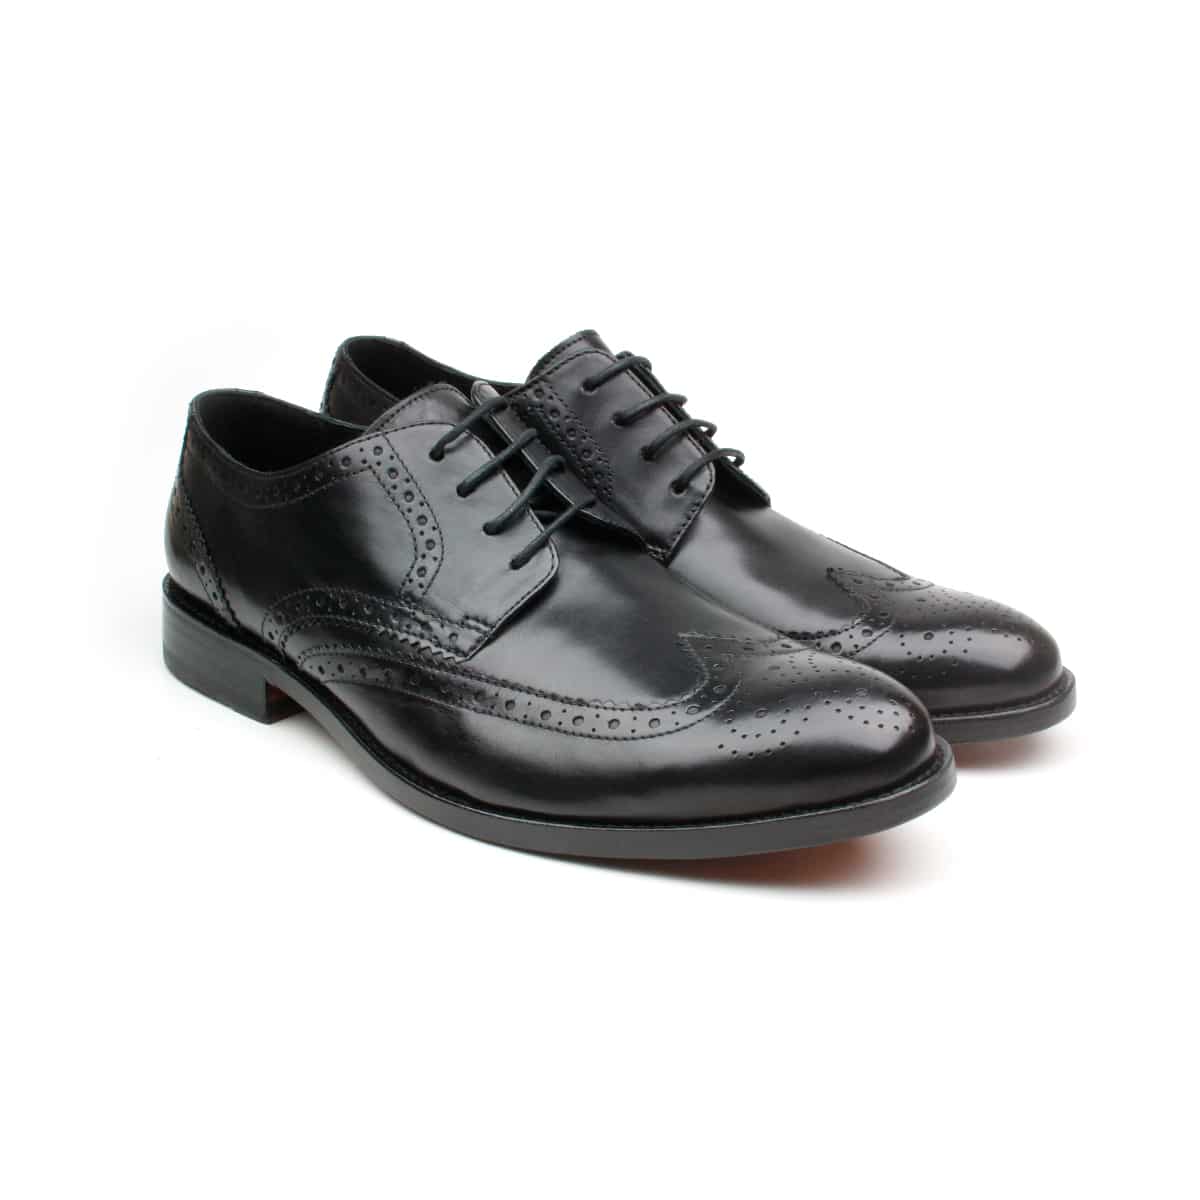 Clarks James Wing Shoes Luxembourg, SAVE 37% -